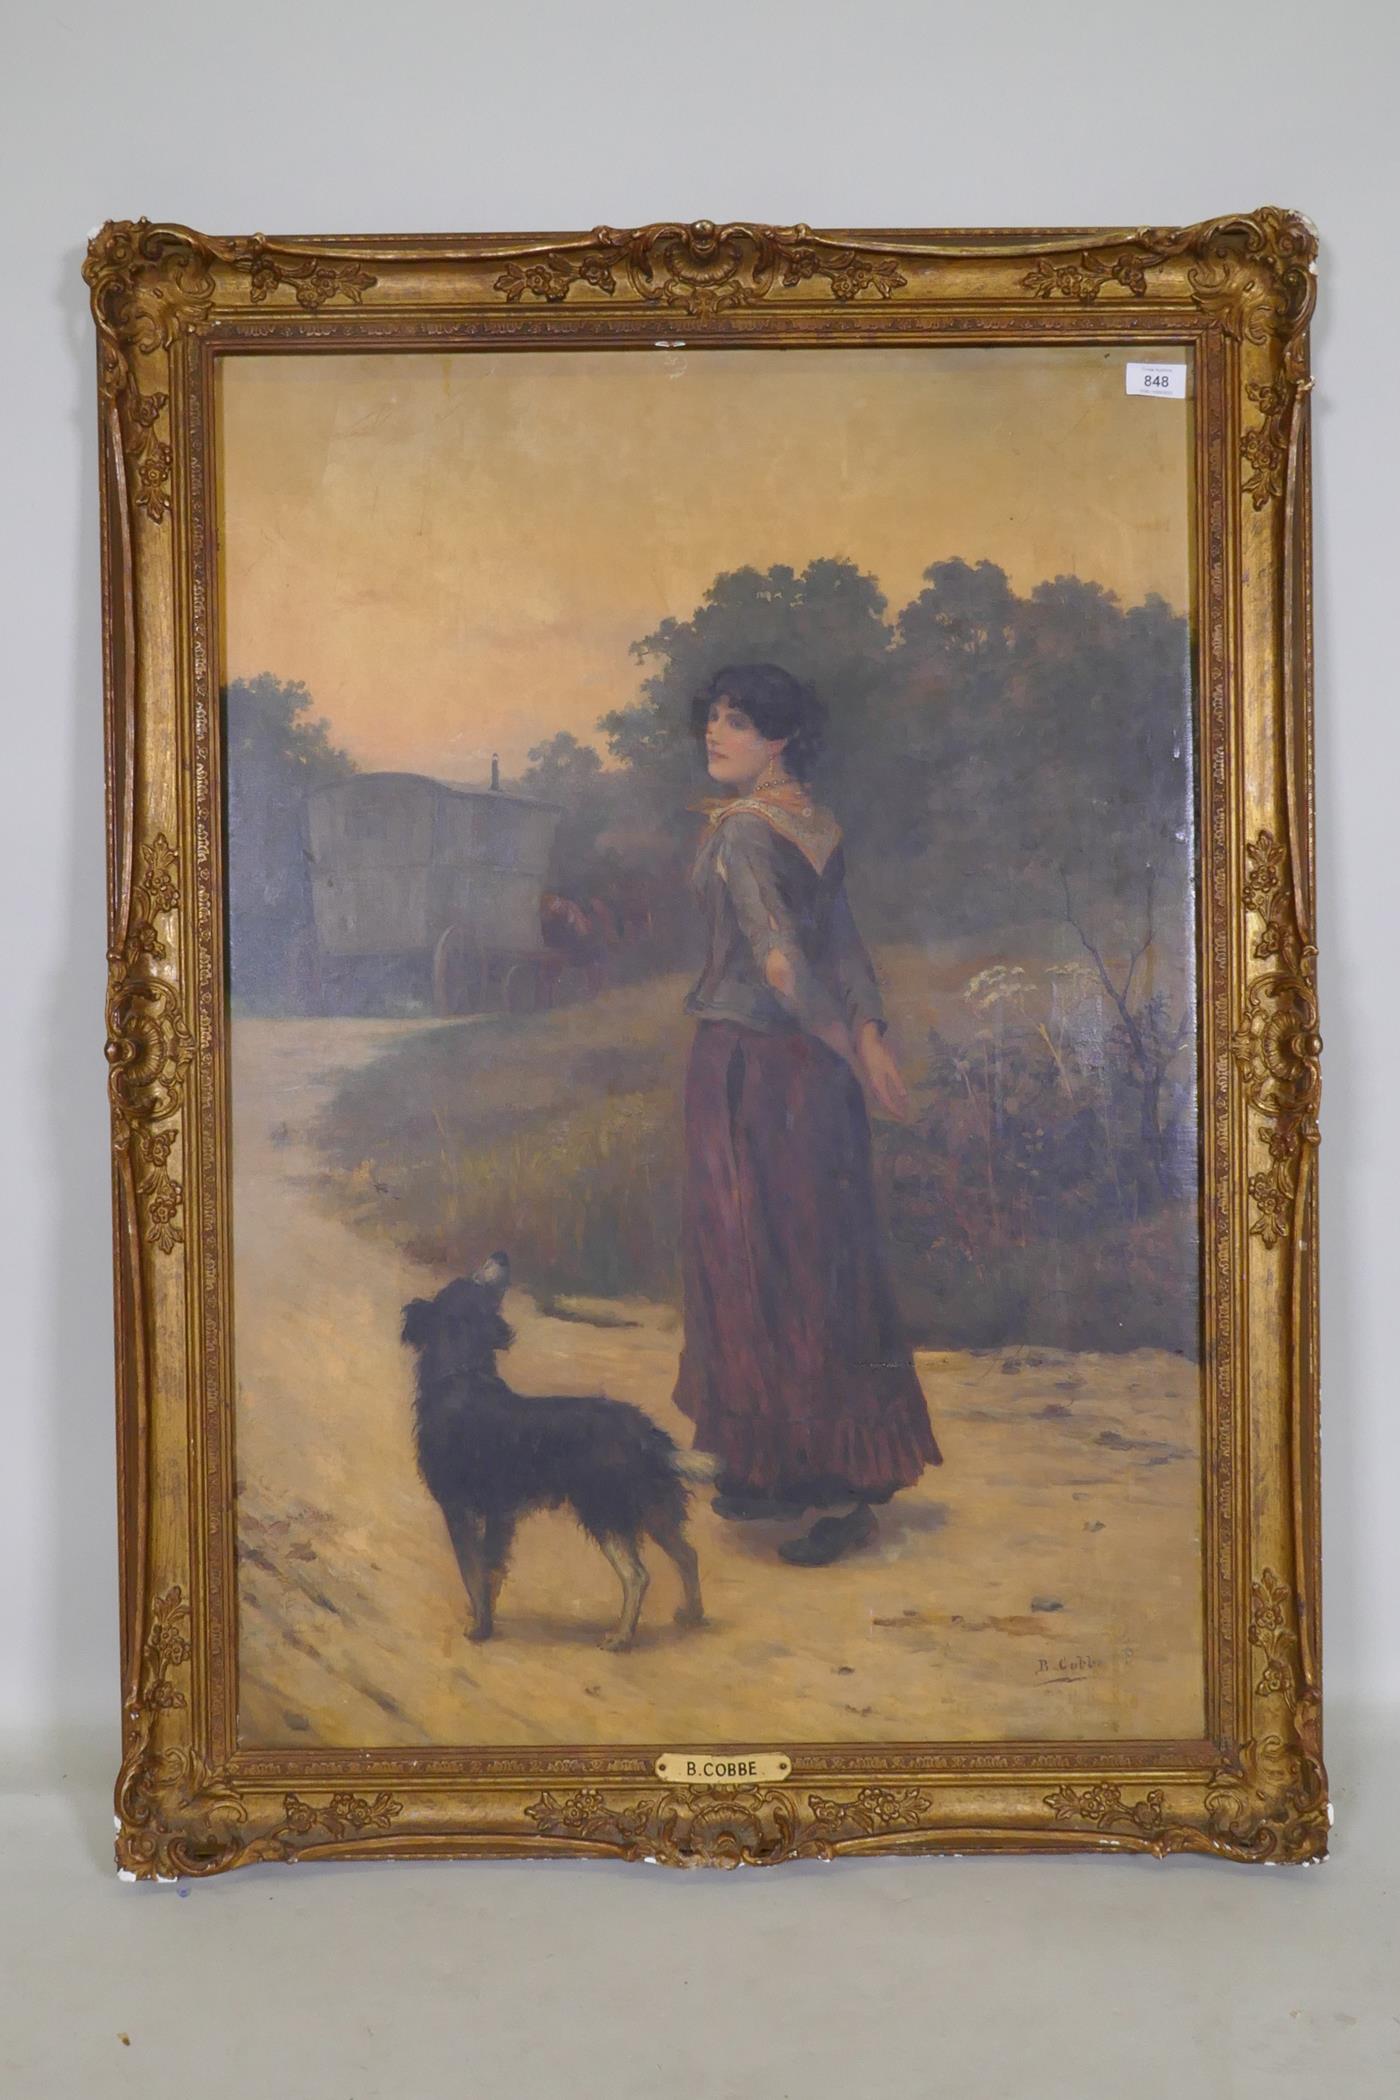 B. Cobbe, gypsy girl and dog on a path with caravan beyond, early C20th, signed, oil on canvas, re- - Image 5 of 6